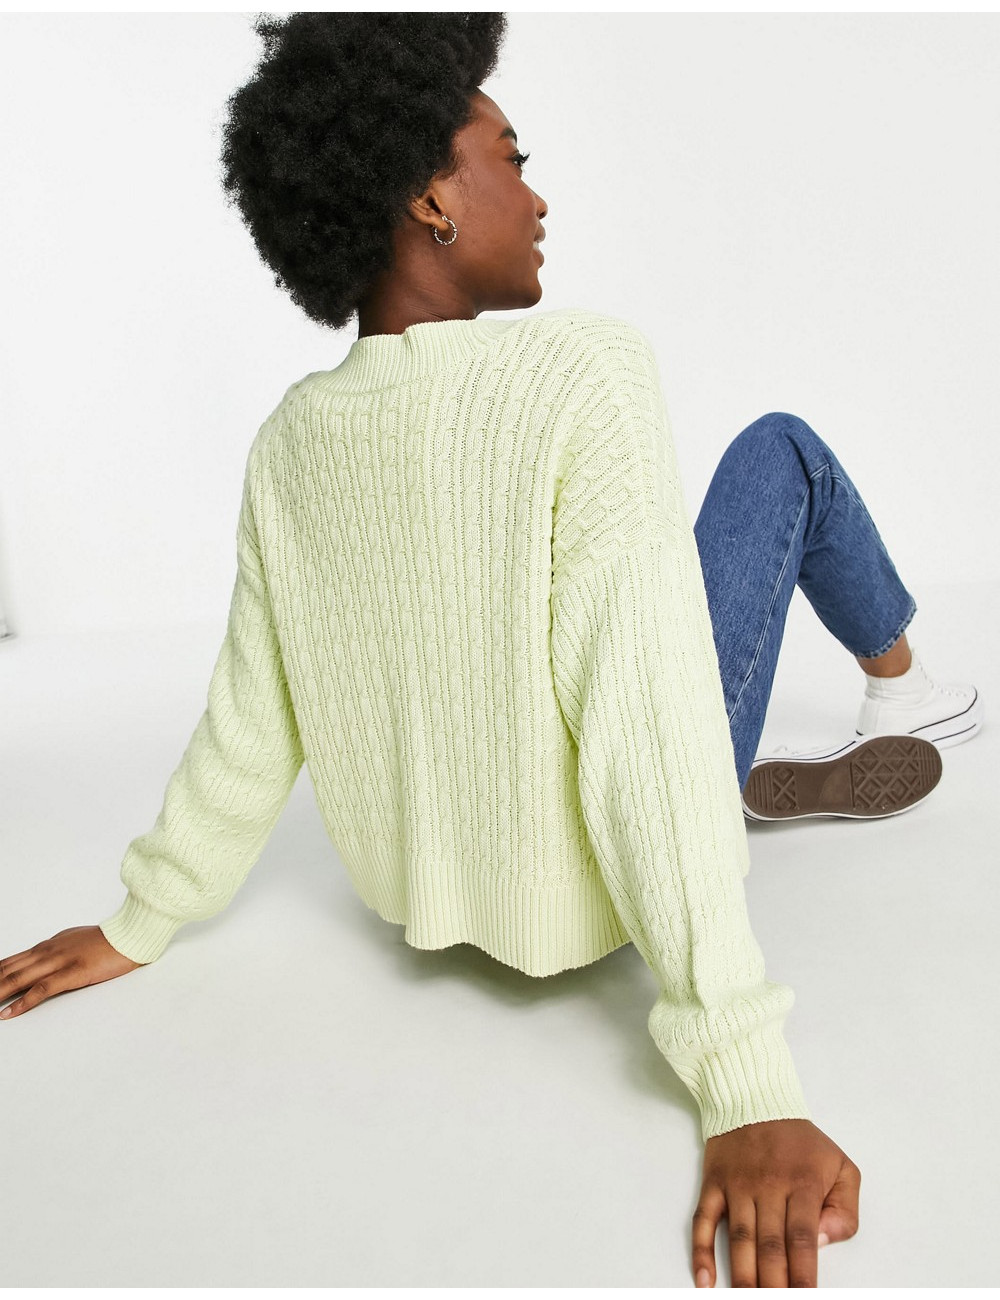 Pimkie cable knit cardigan...